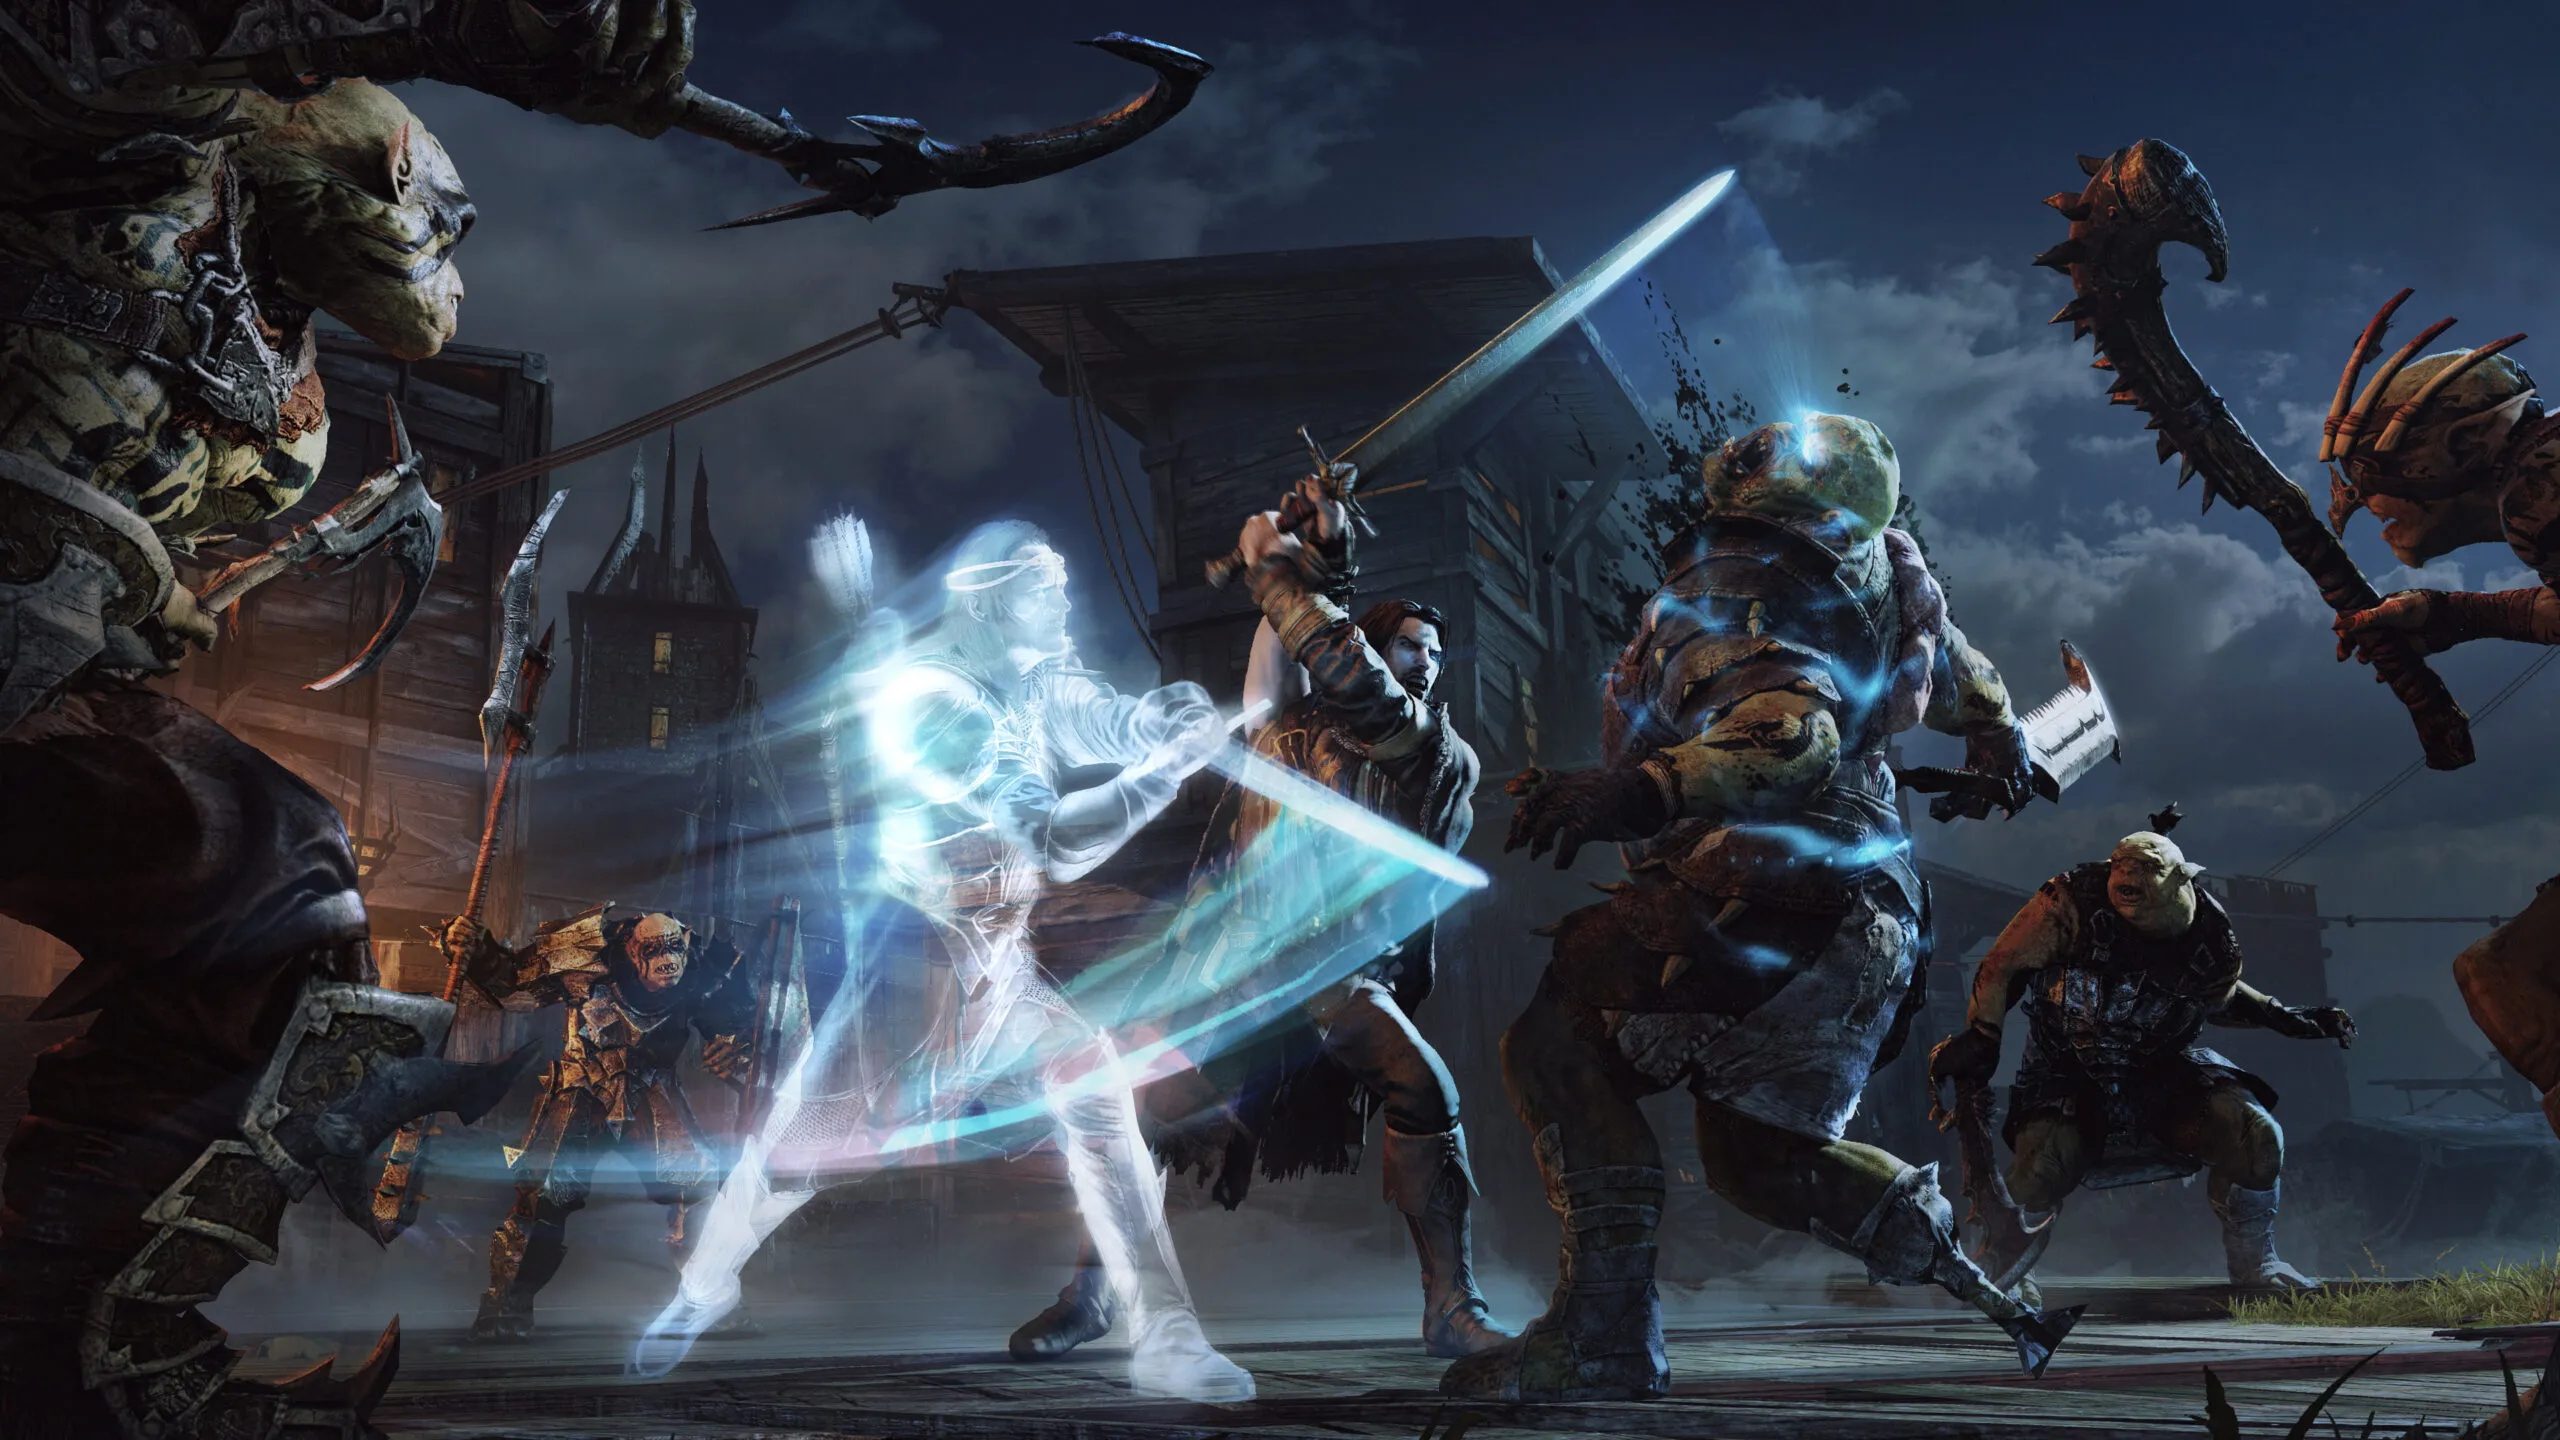 Rumor: Middle-earth: Shadow of Mordor Sequel Leaked by Target